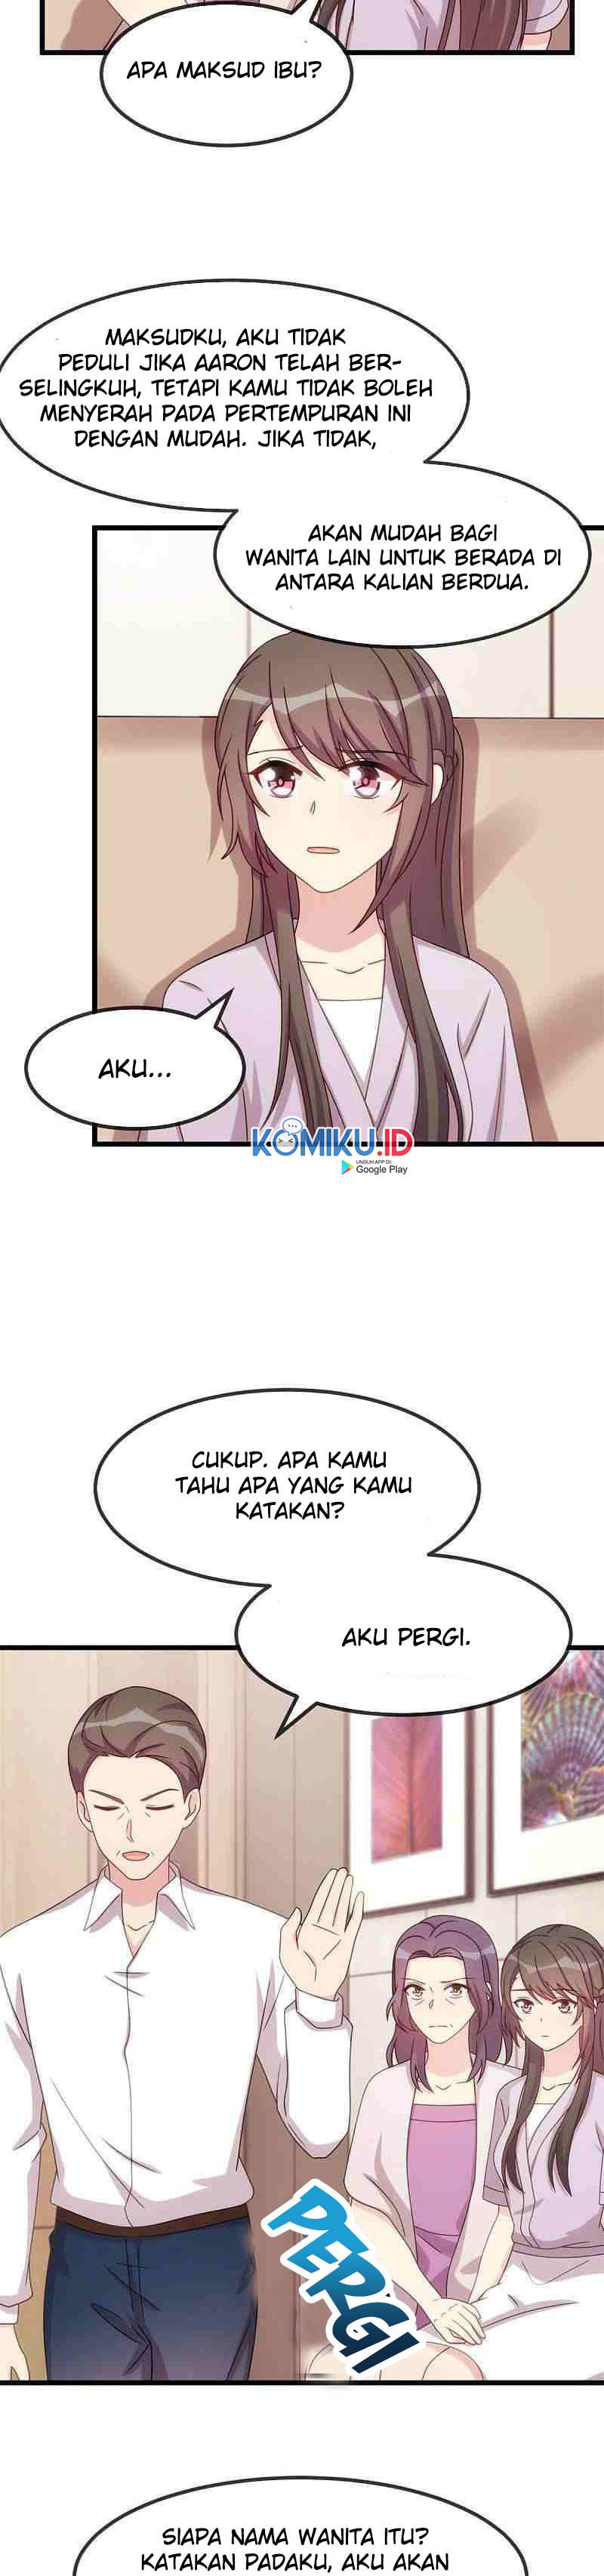 CEO’s Sudden Proposal Chapter 338 5